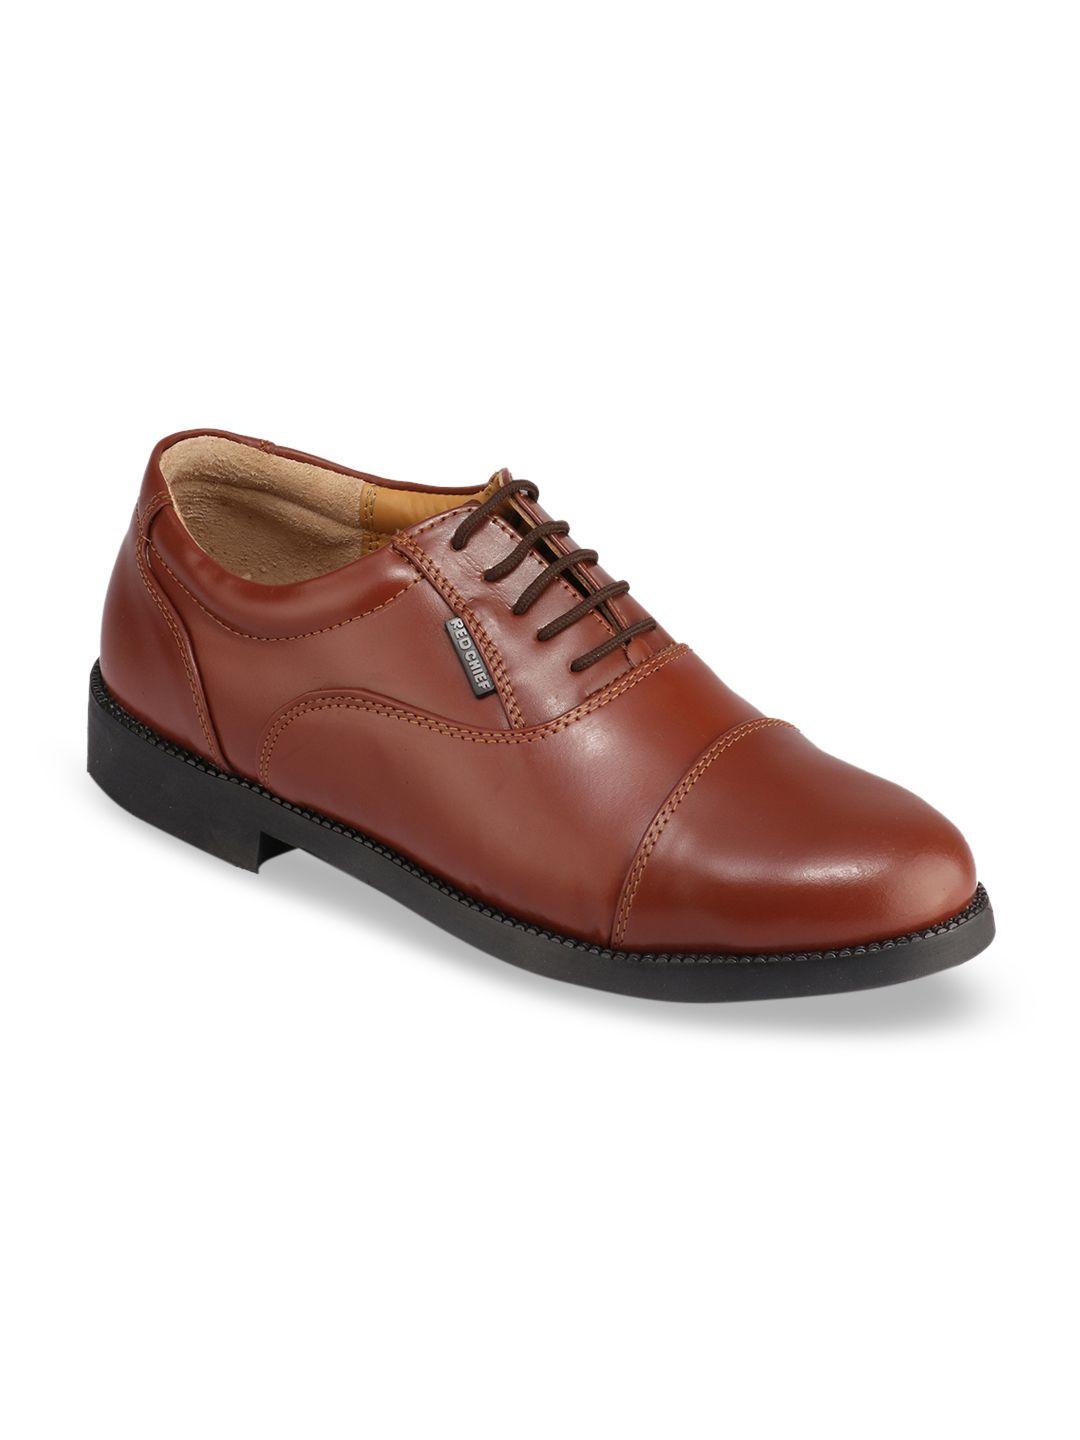 red-chief-men-brown-solid-leather-formal-oxfords